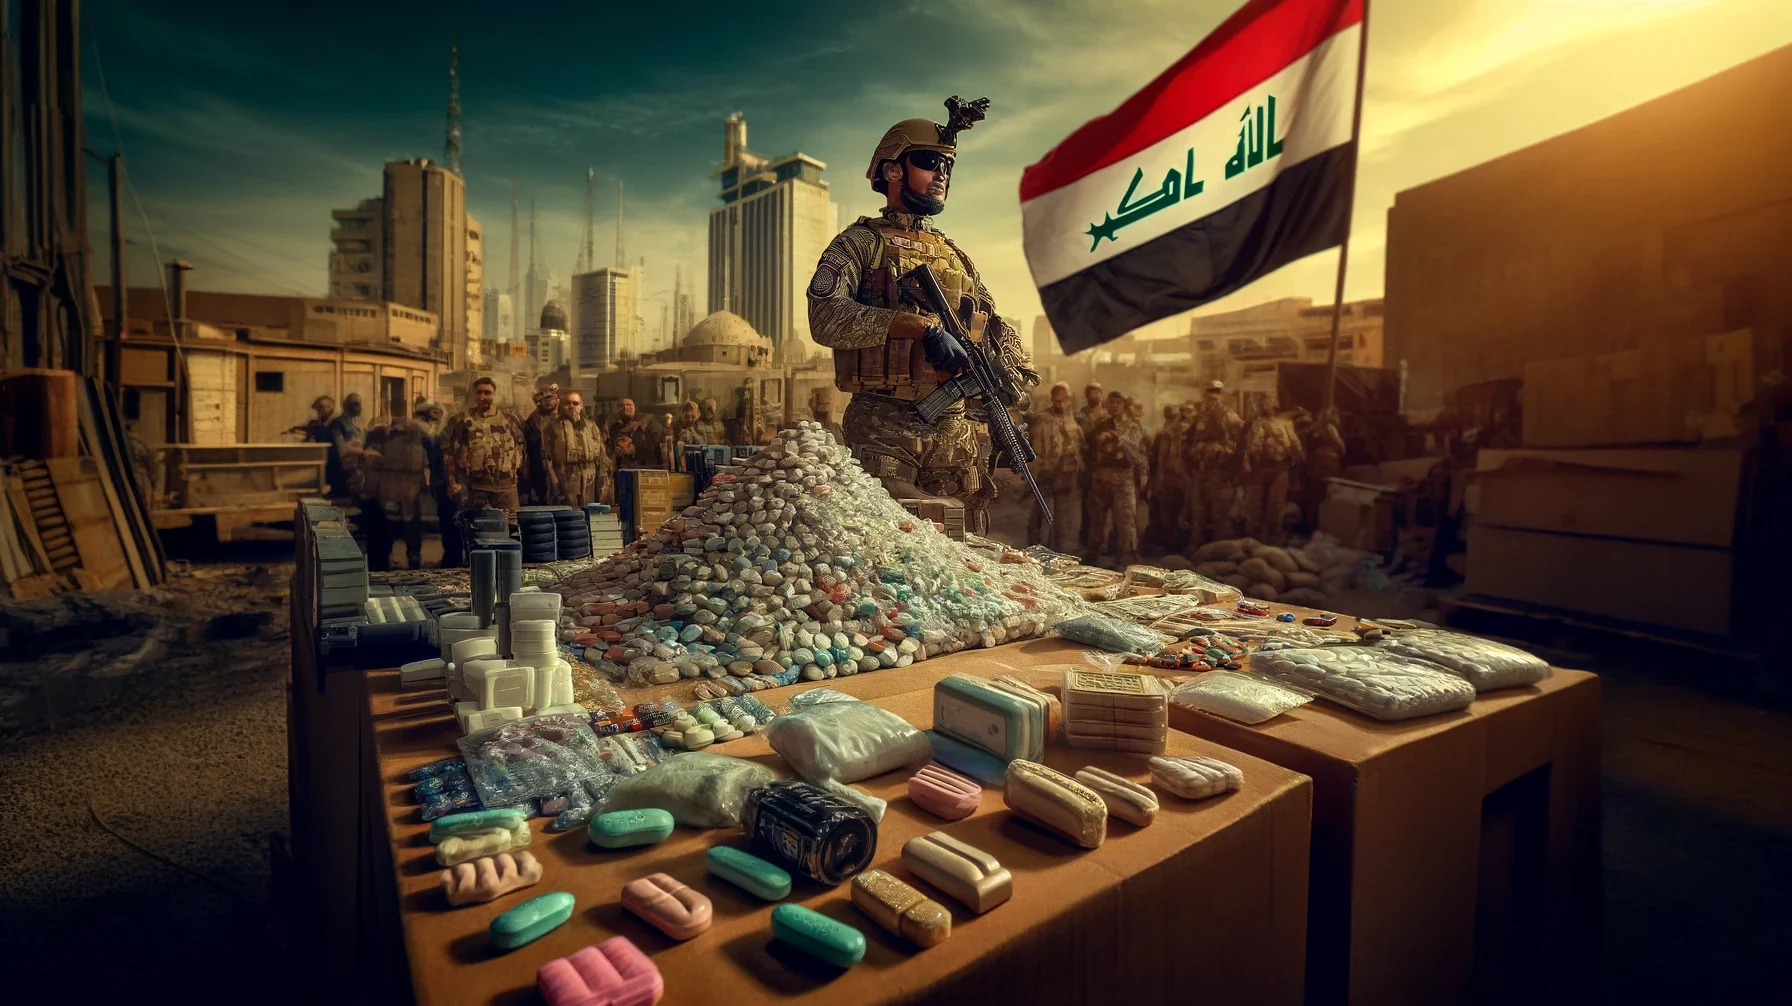 Iraqi Forces Seize One Million Narcotic Pills in Major Drug Bust